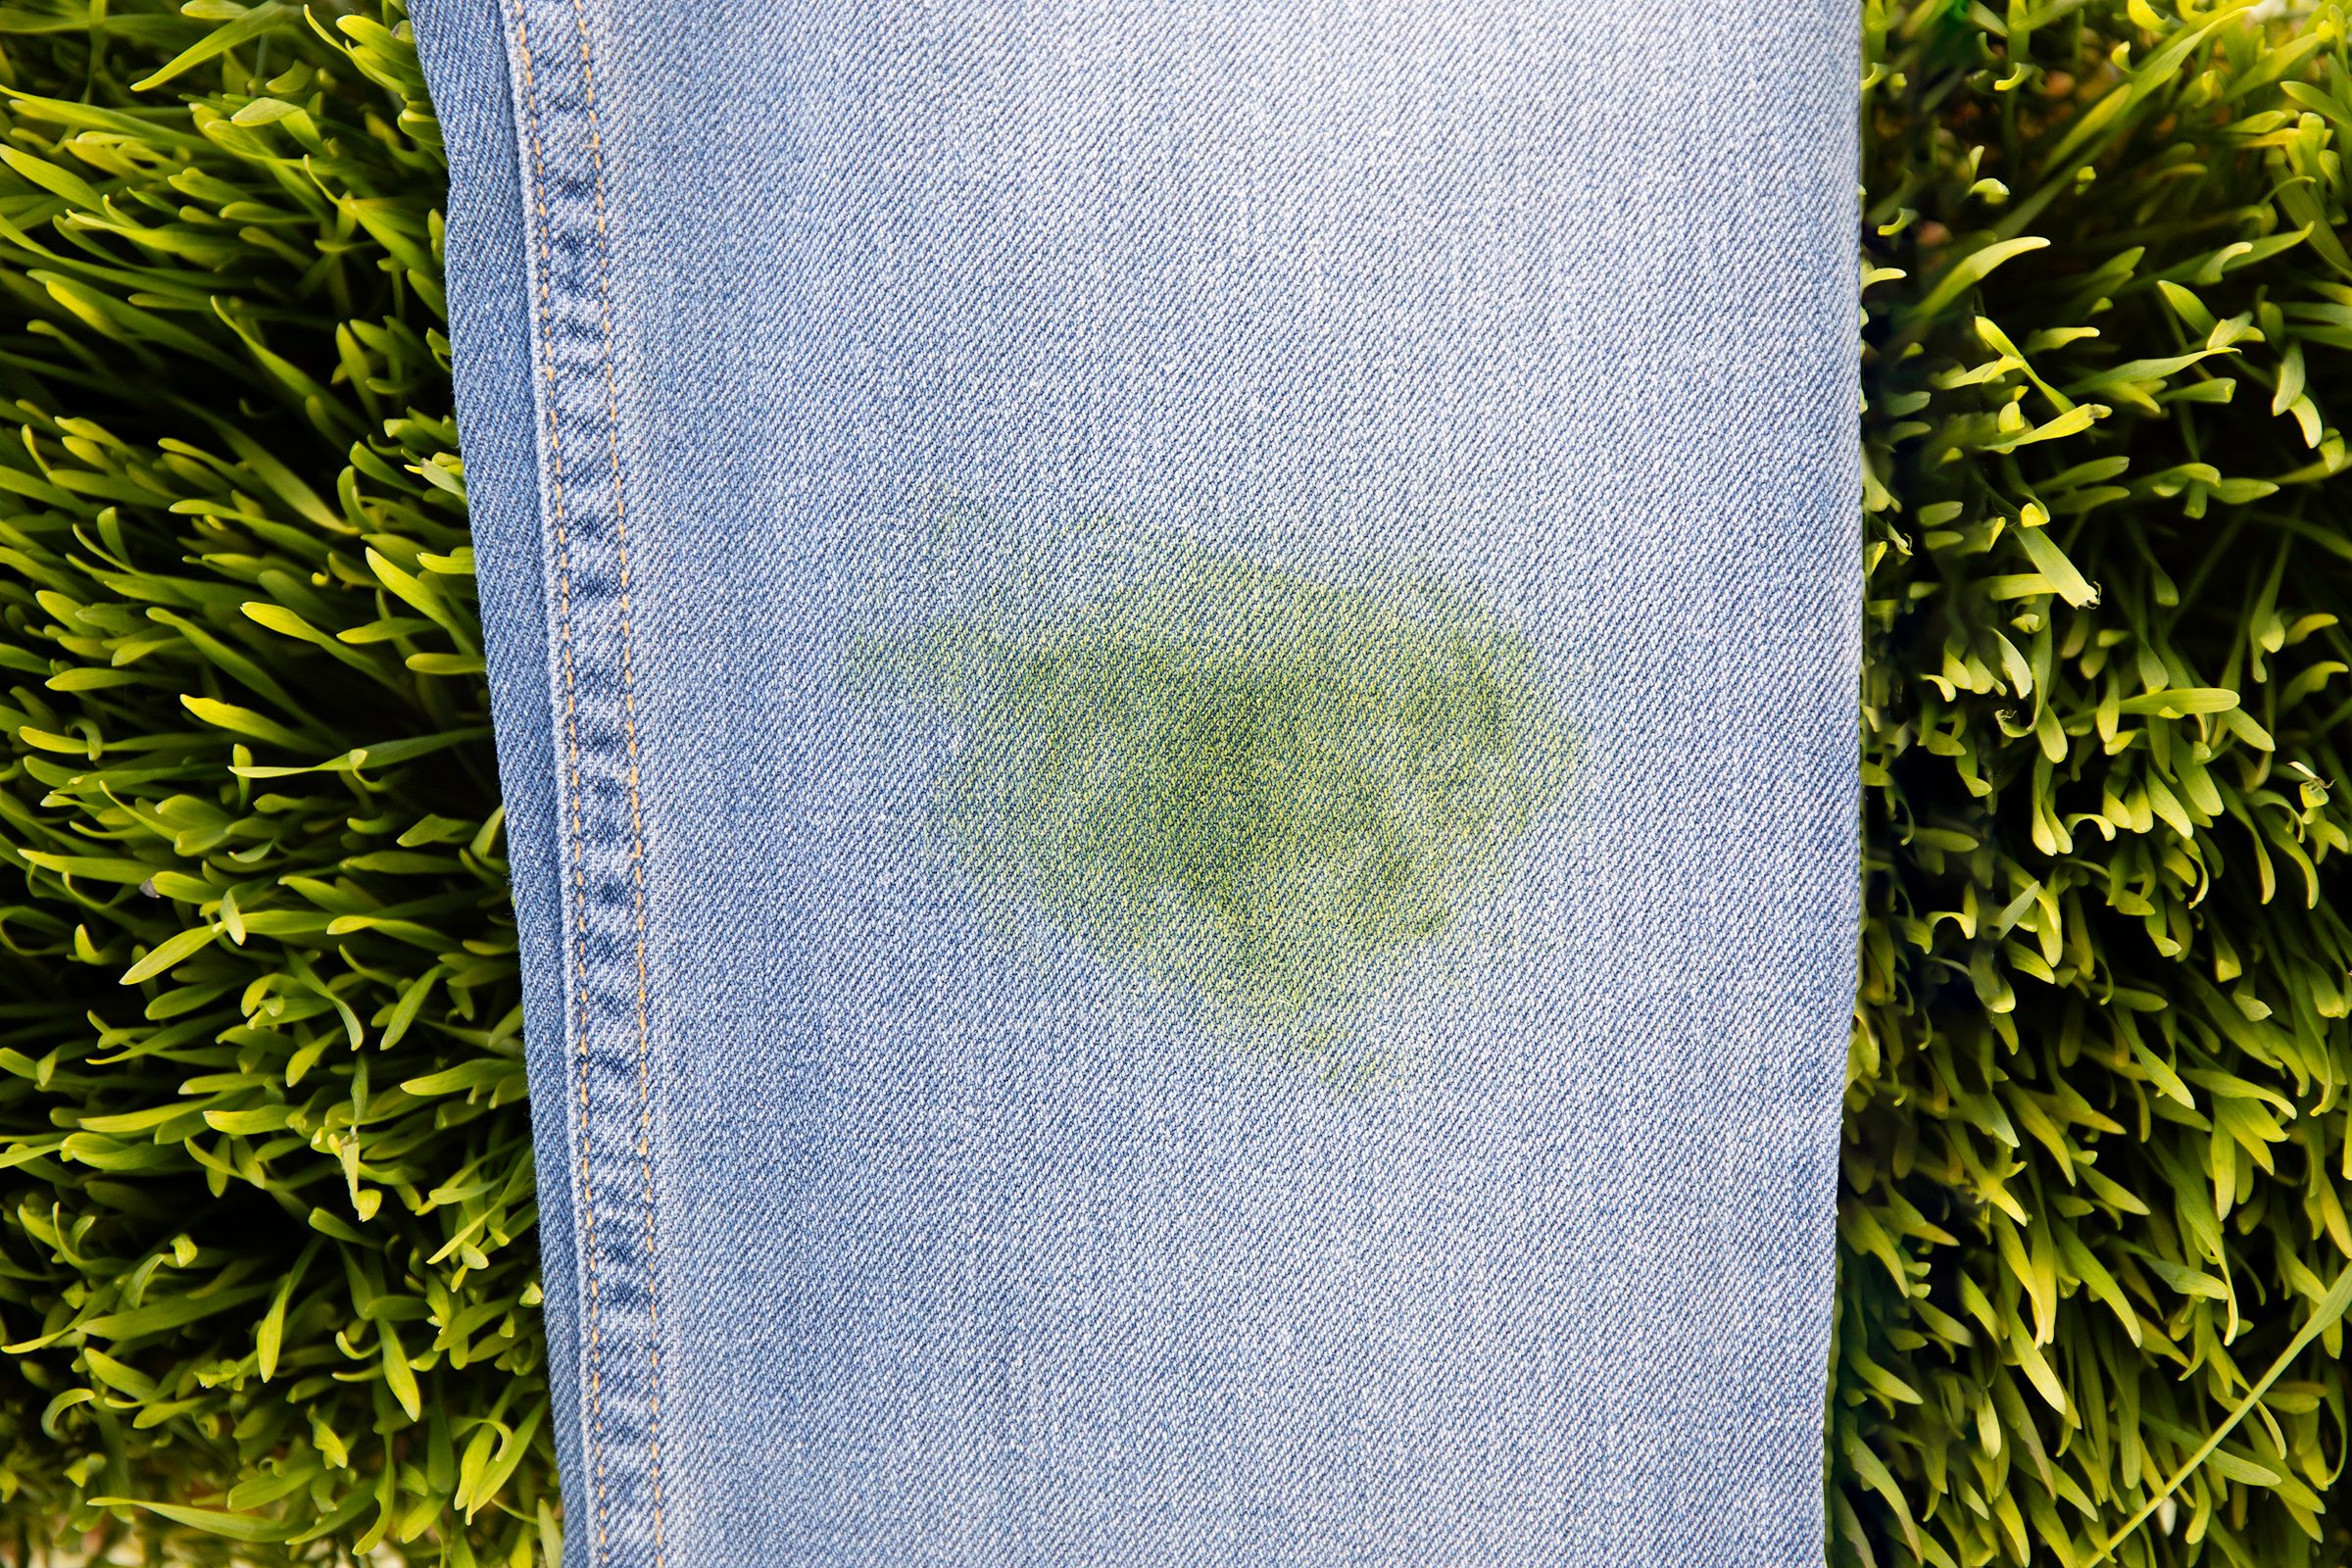 How to Remove Grass Stains — How to Get Grass Stains Out of Jeans